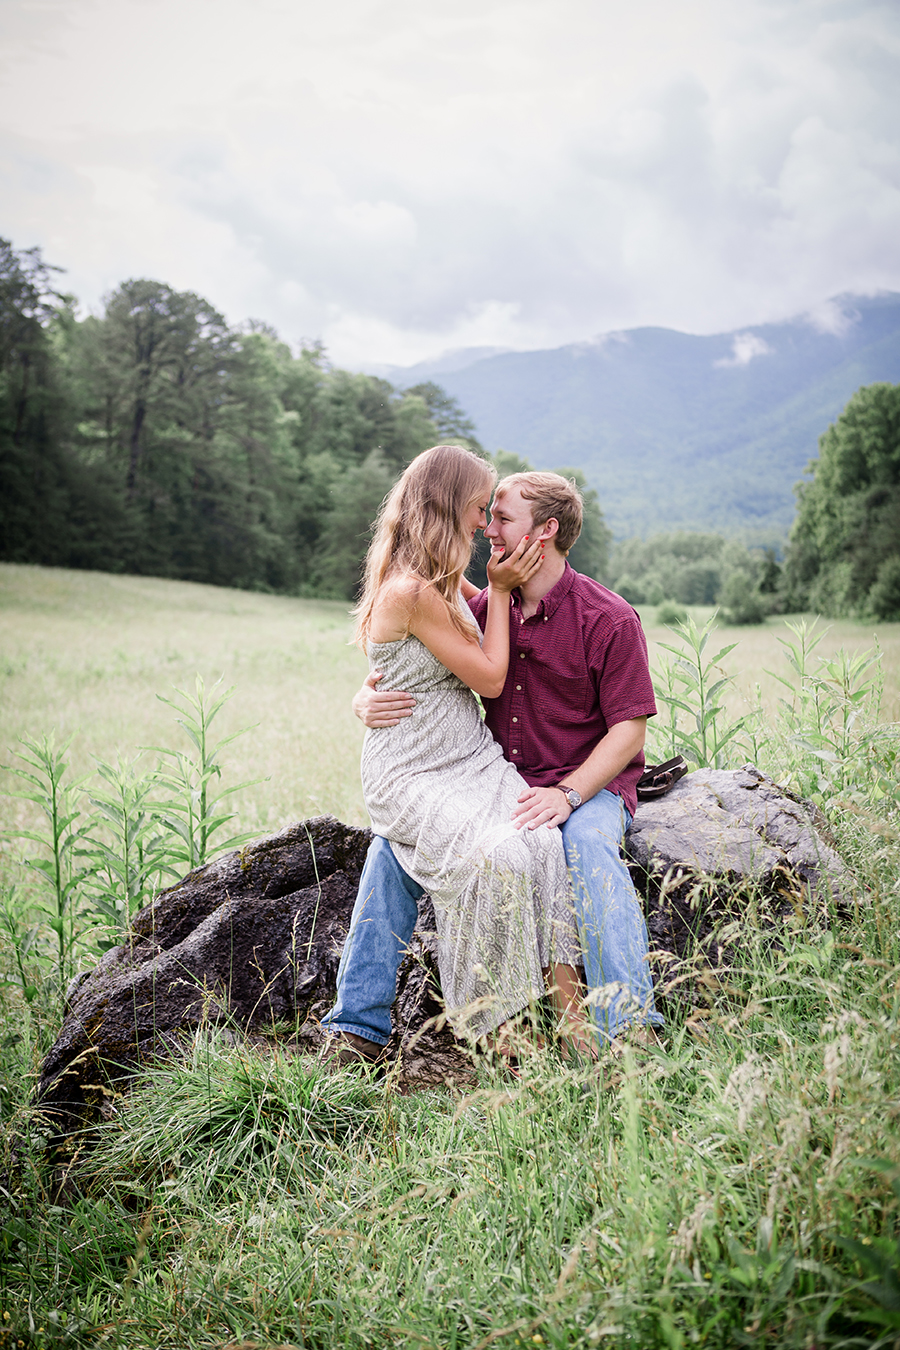 She sits on his lap engagement photo by Knoxville Wedding Photographer, Amanda May Photos.